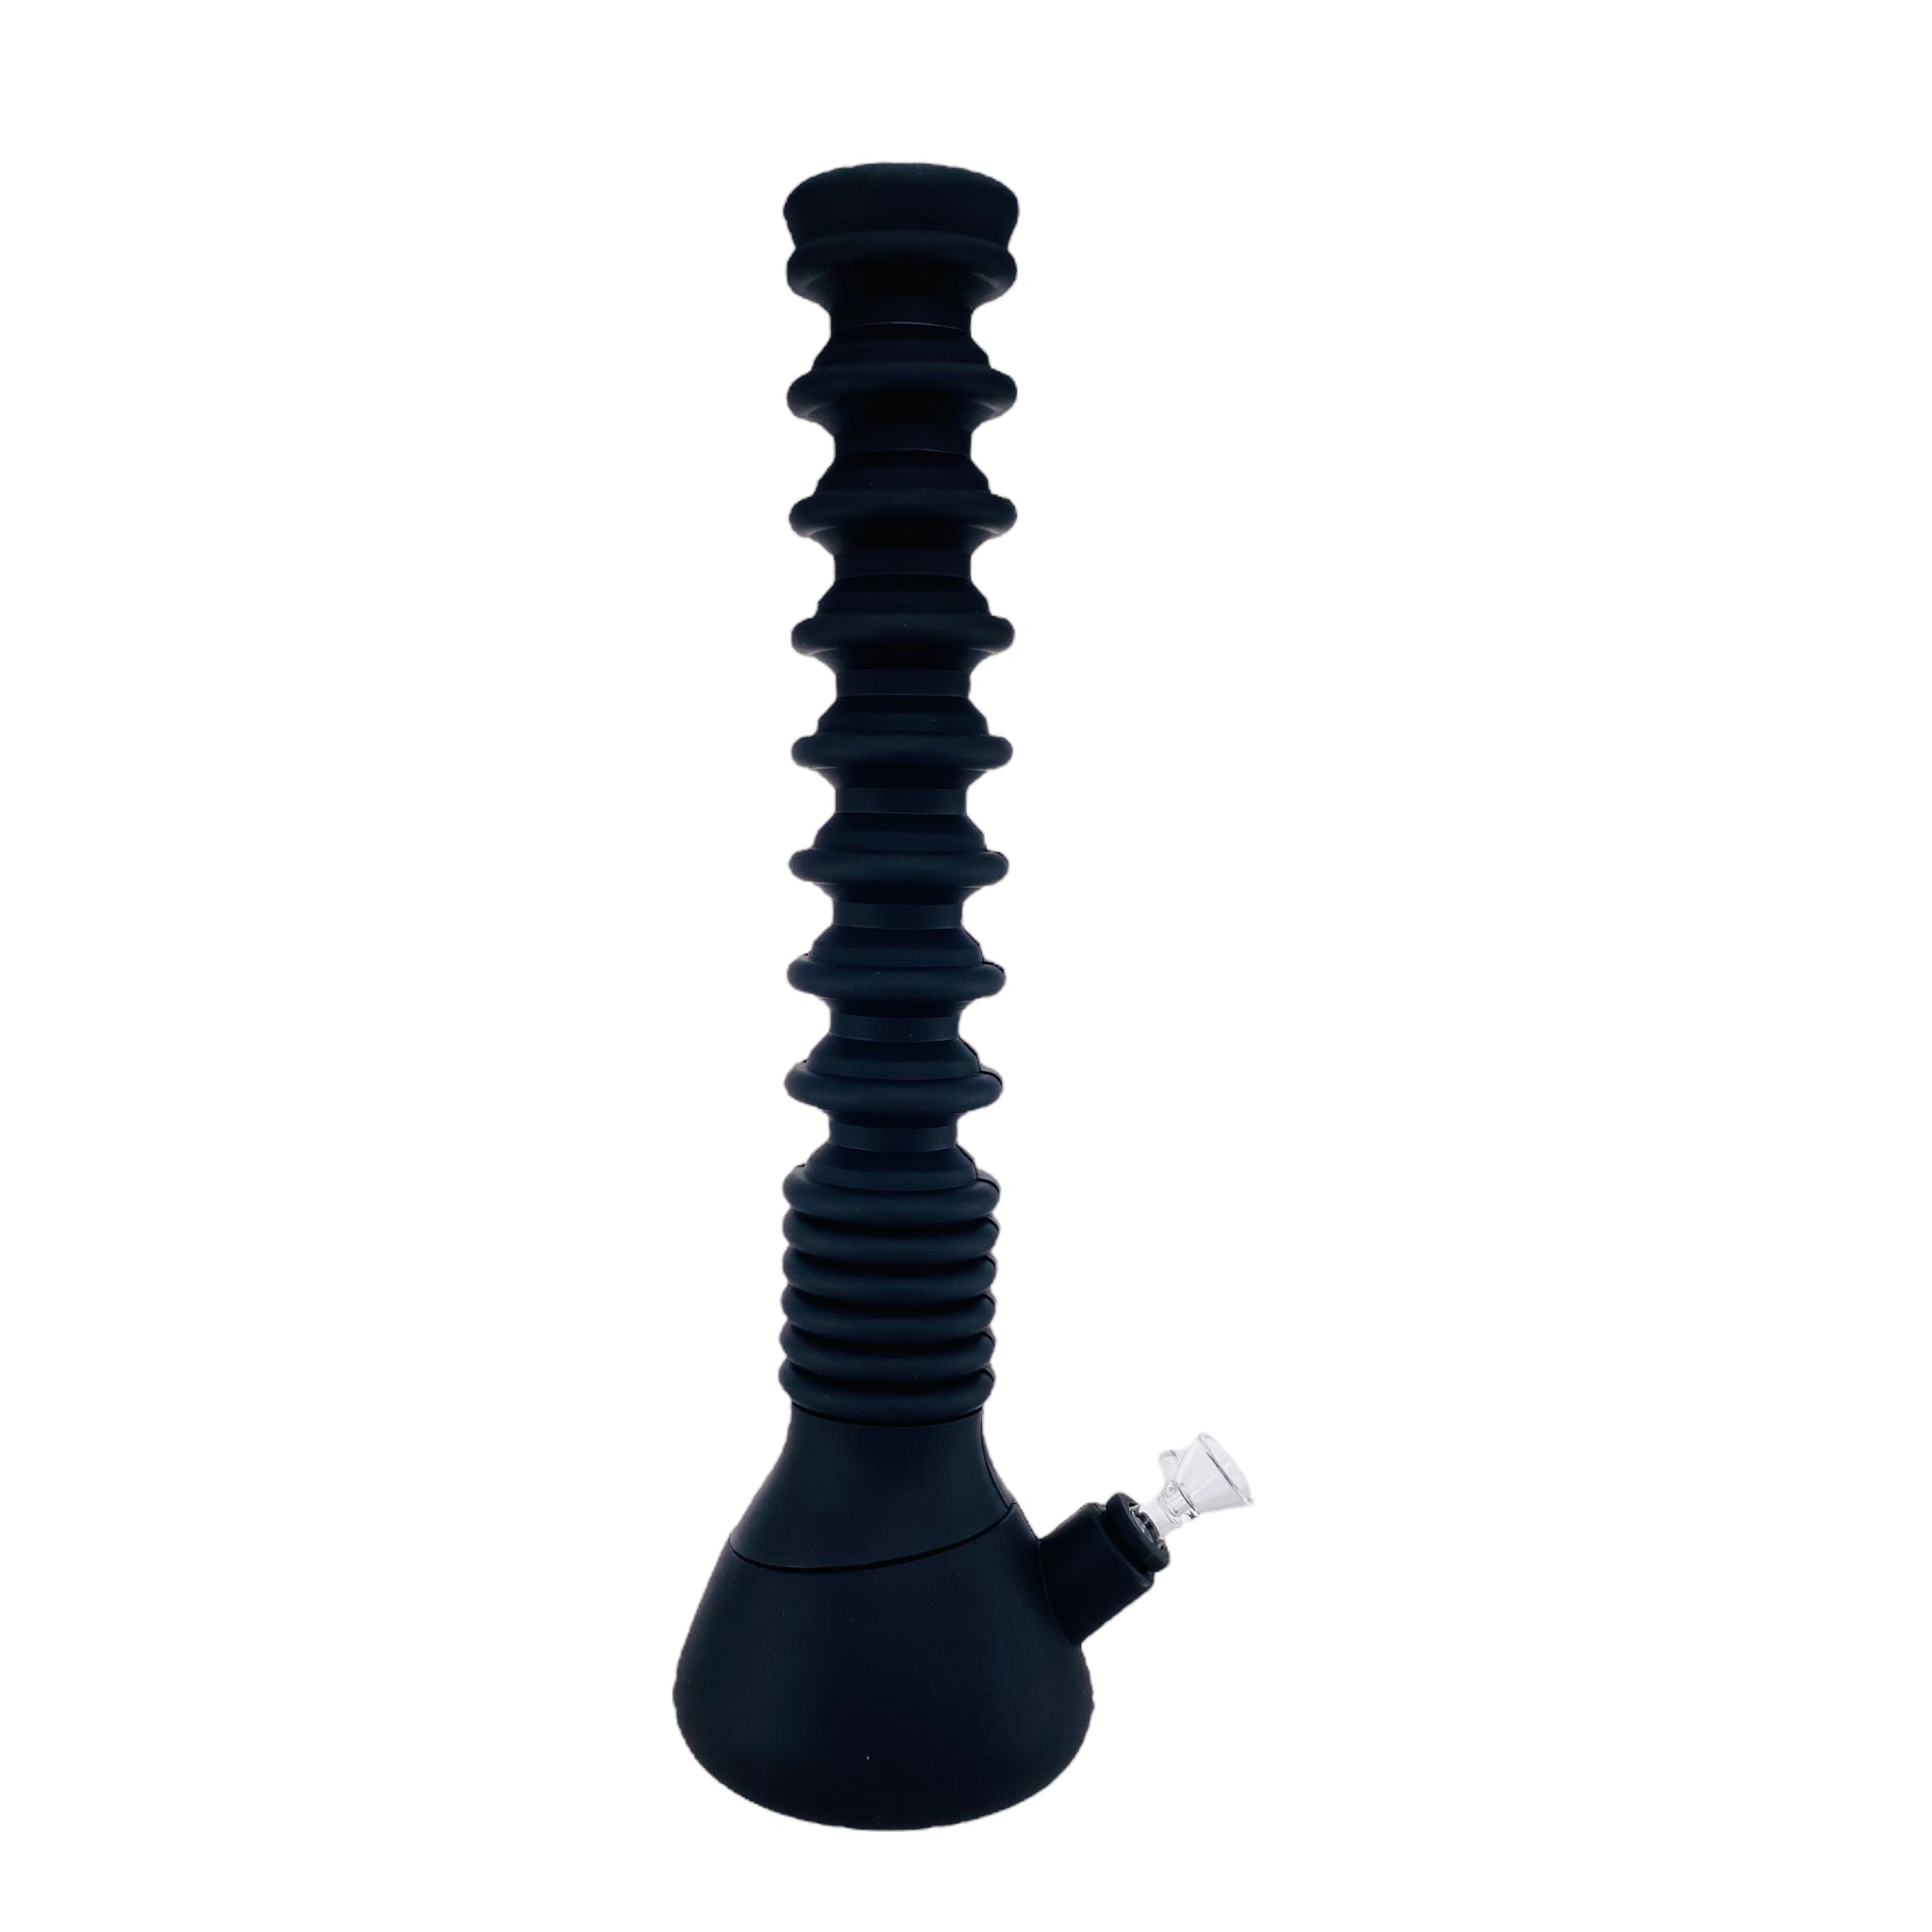 Extendable Silicone Rubber Bong Black